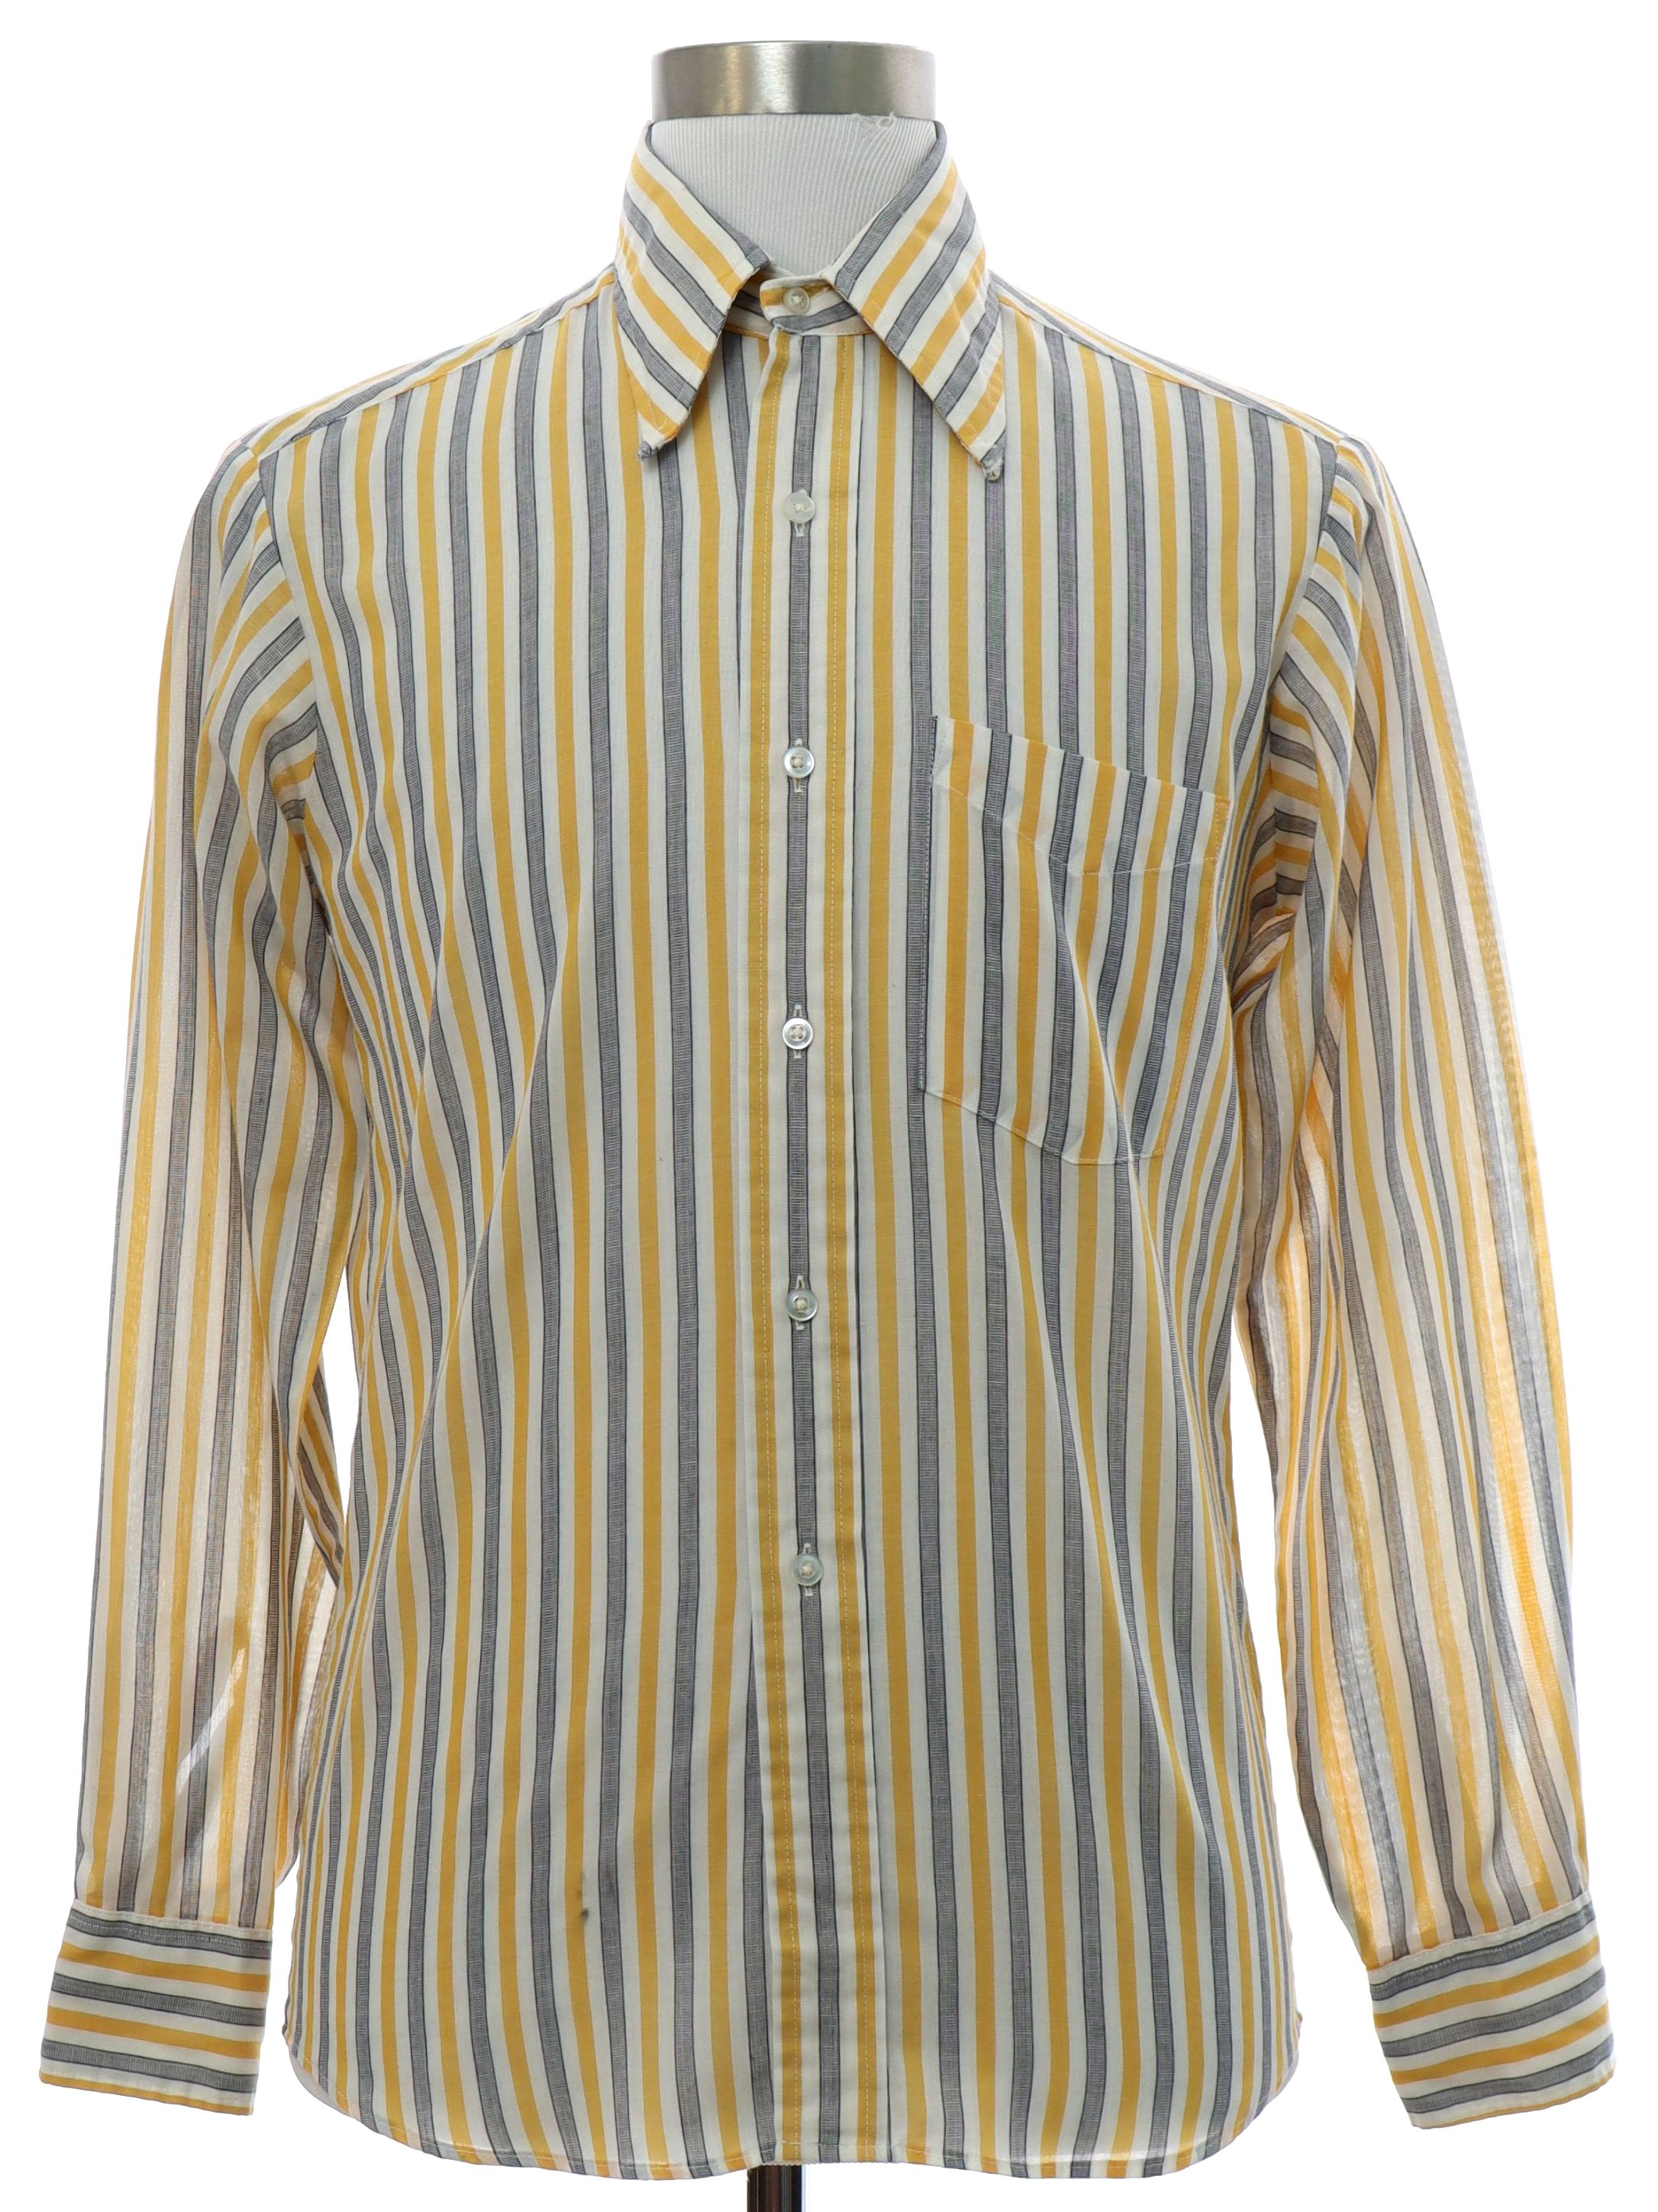 70s Shirt (Care Label): 70s -Care Label- Mens white, gray, and yellow ...